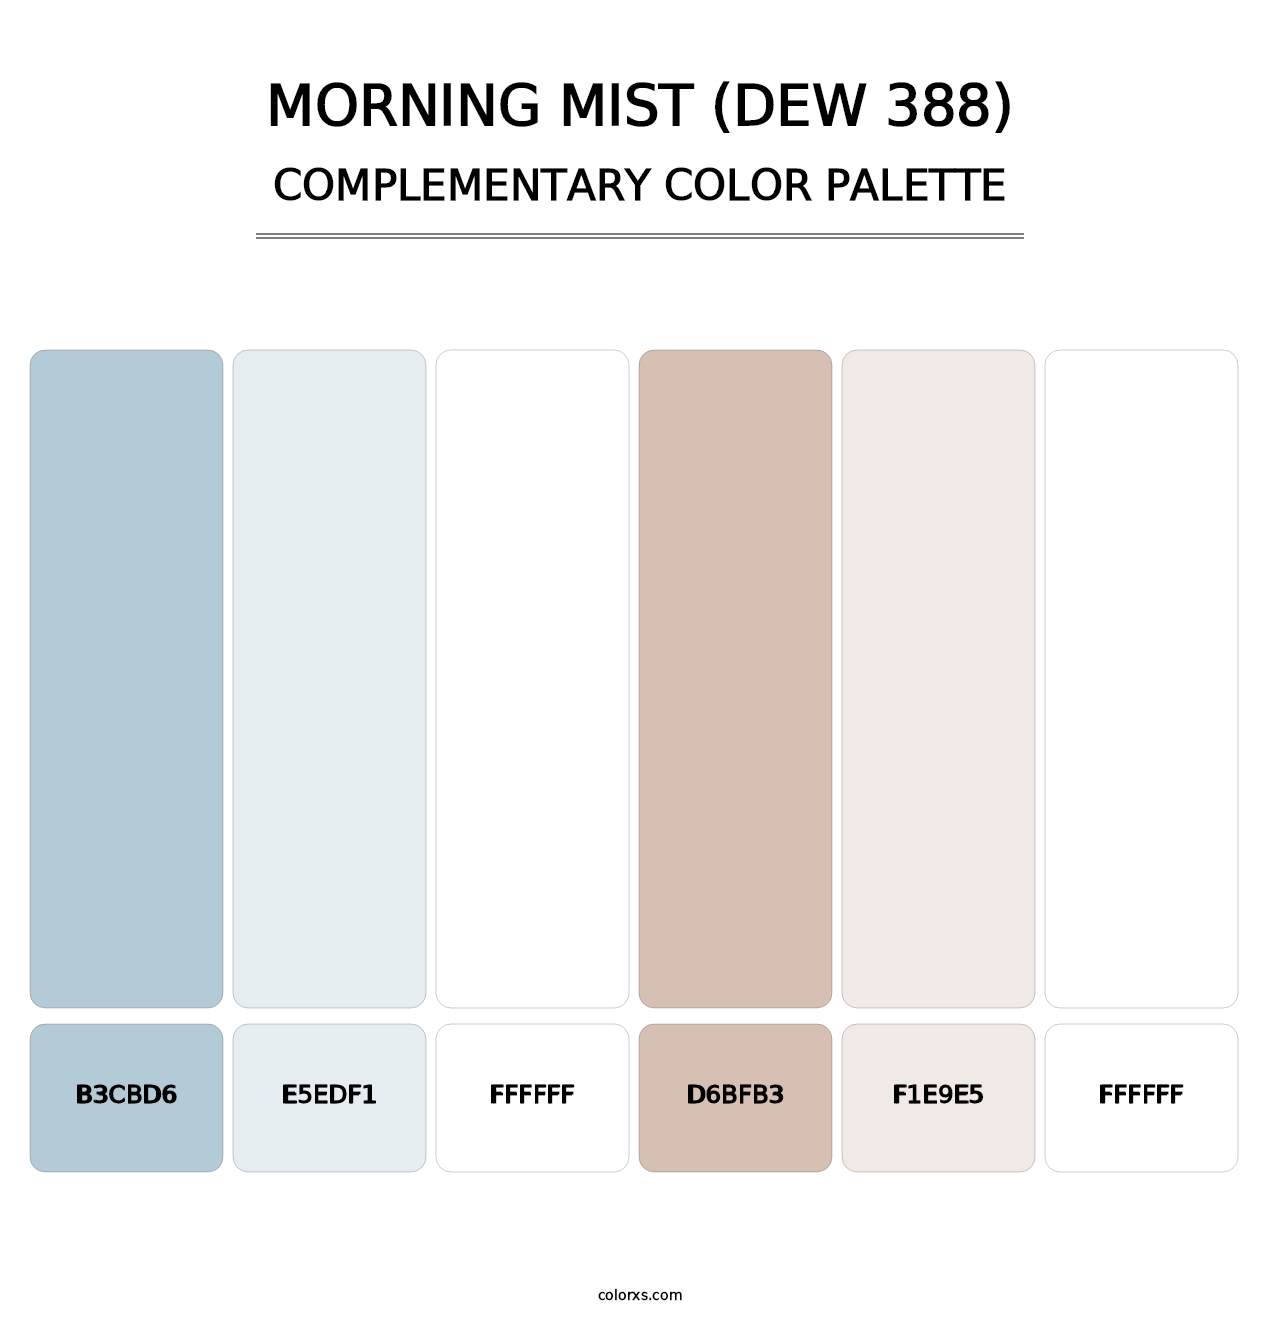 Morning Mist (DEW 388) - Complementary Color Palette